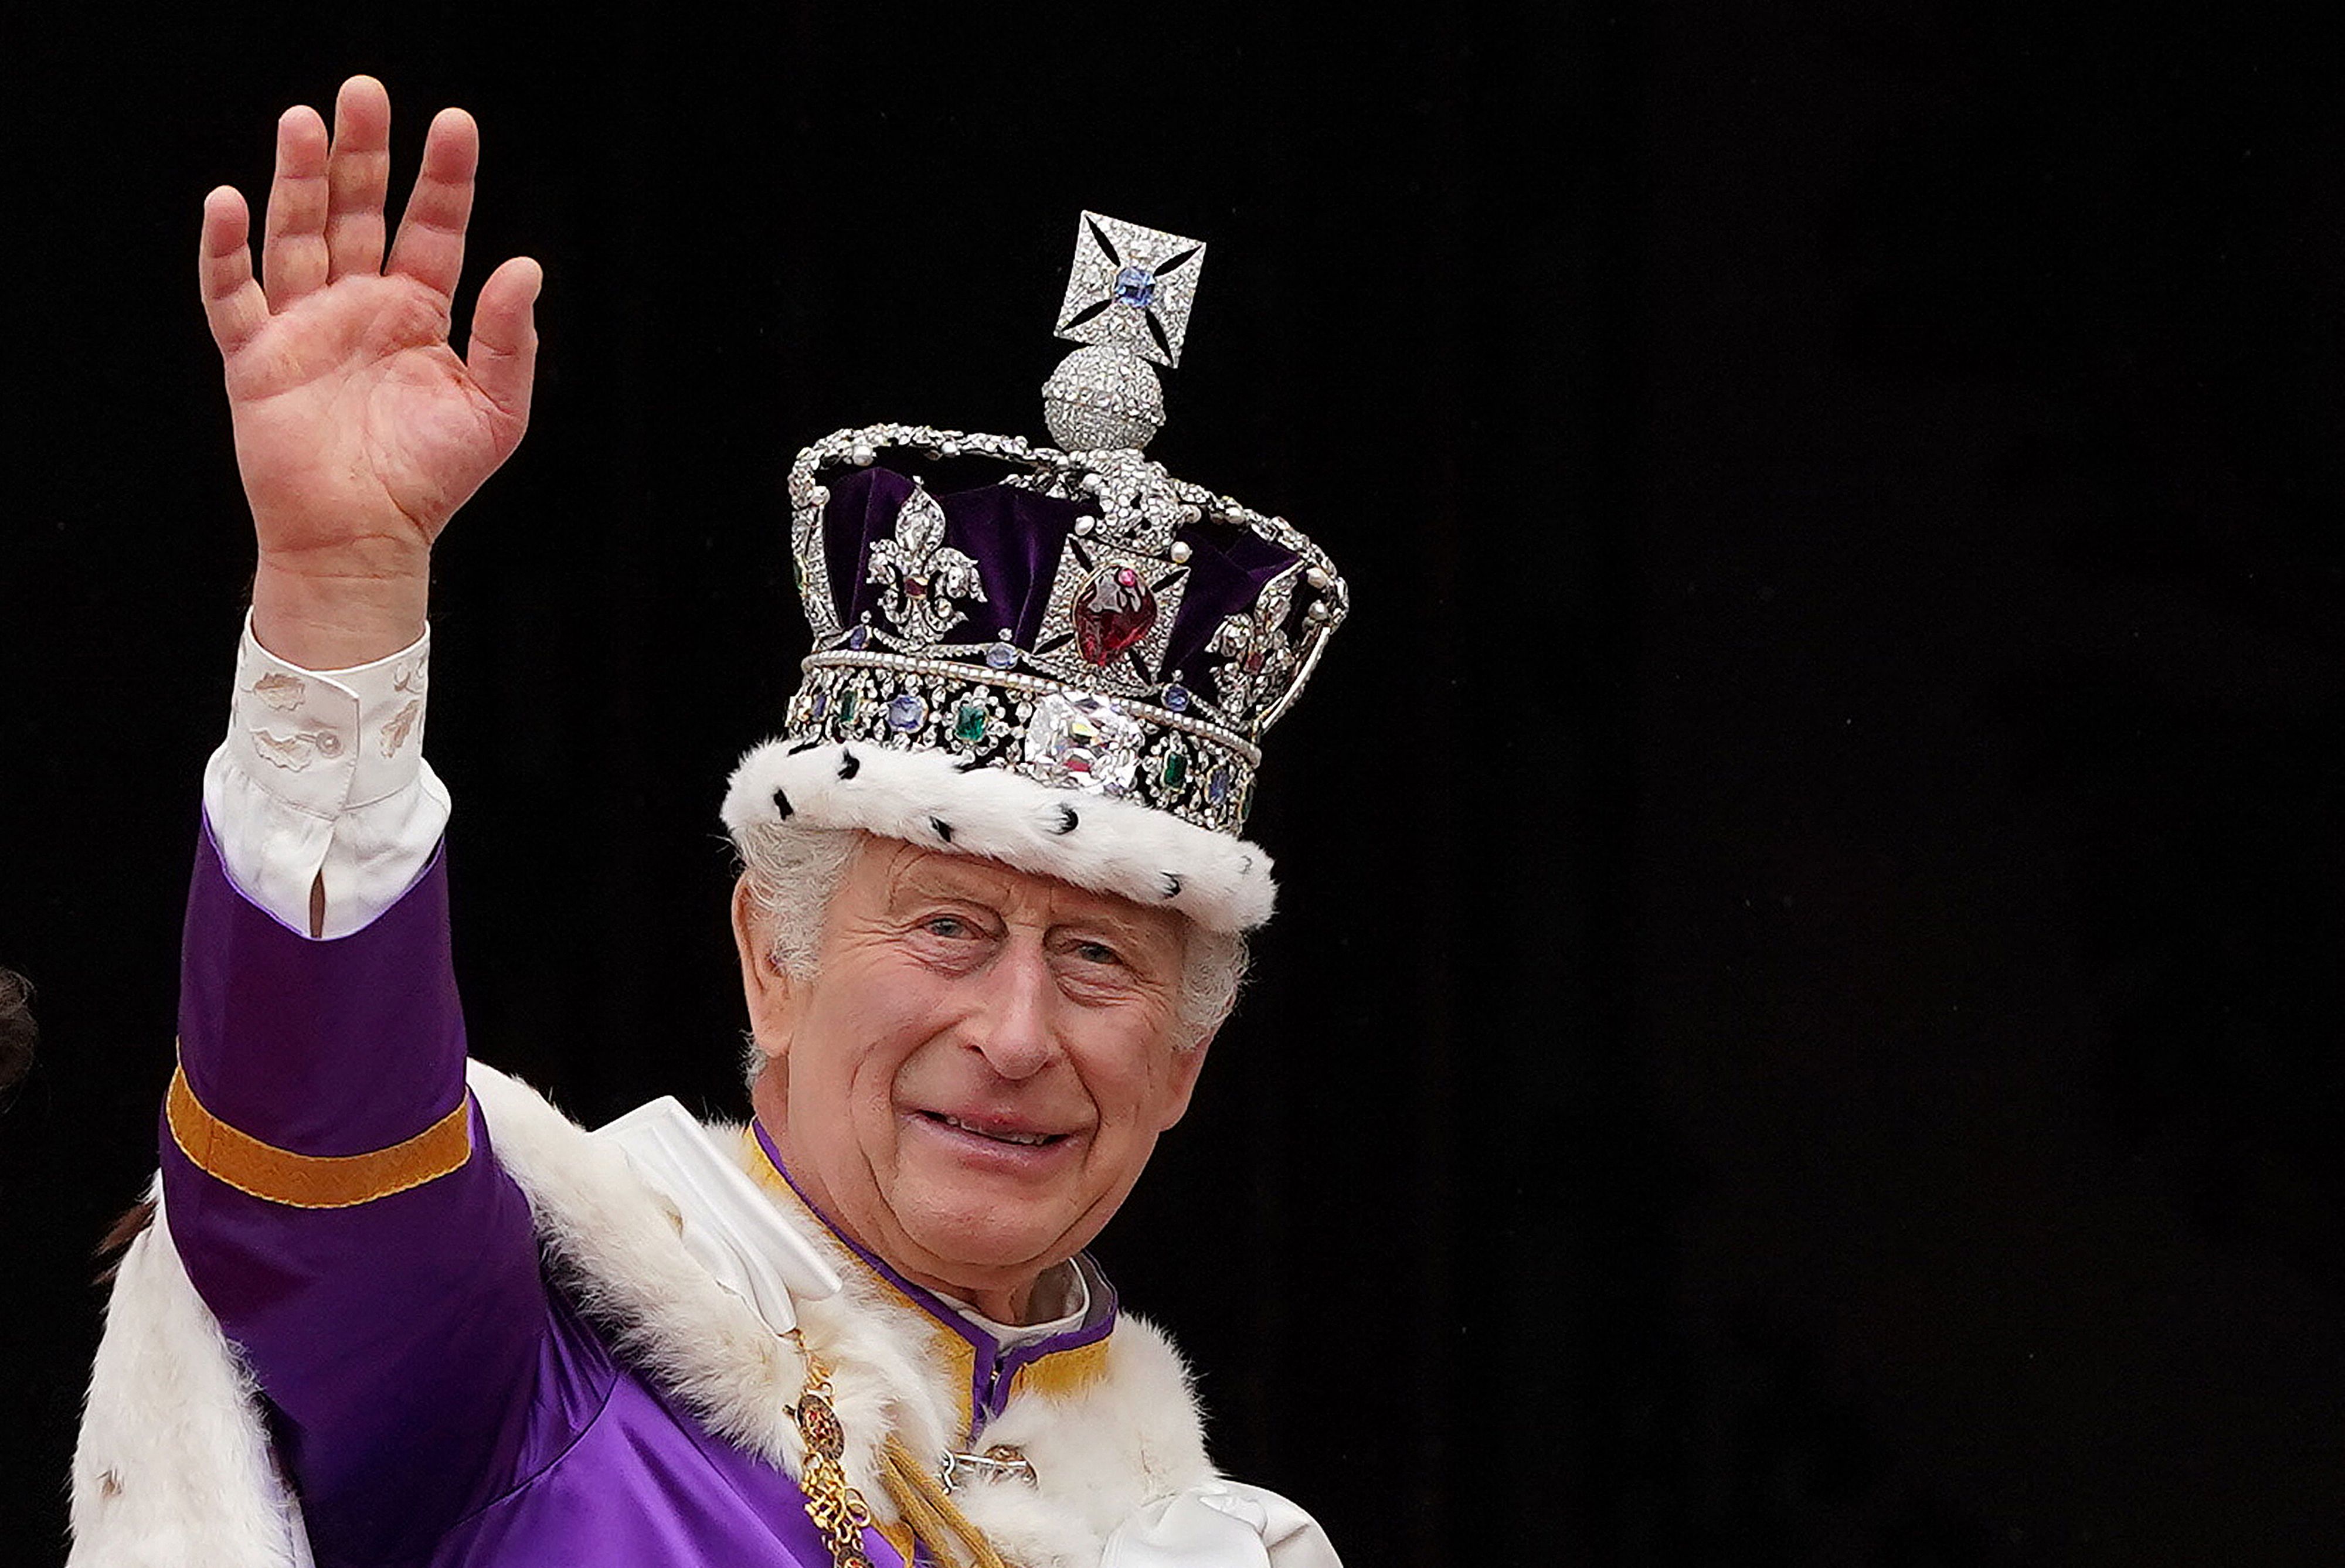 Britain's King Charles III wearing the Imperial state Crown in central London on May 6, 2023 | Source: Getty Images